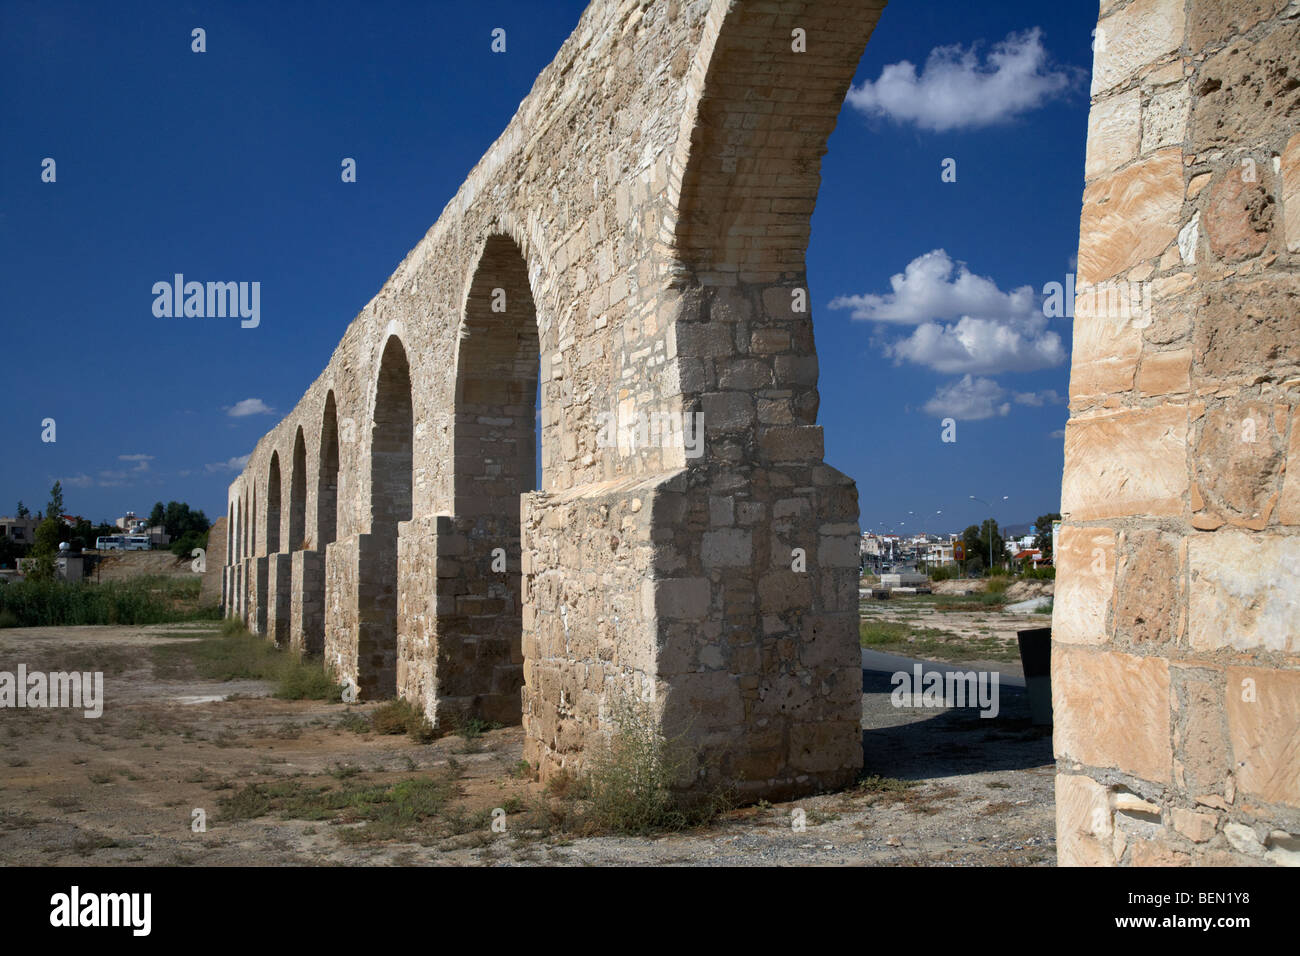 kamares aqueduct larnaca republic of cyprus europe the aqueduct was built in 1750 by Bekir Pasha the Ottoman governor of Cyprus Stock Photo